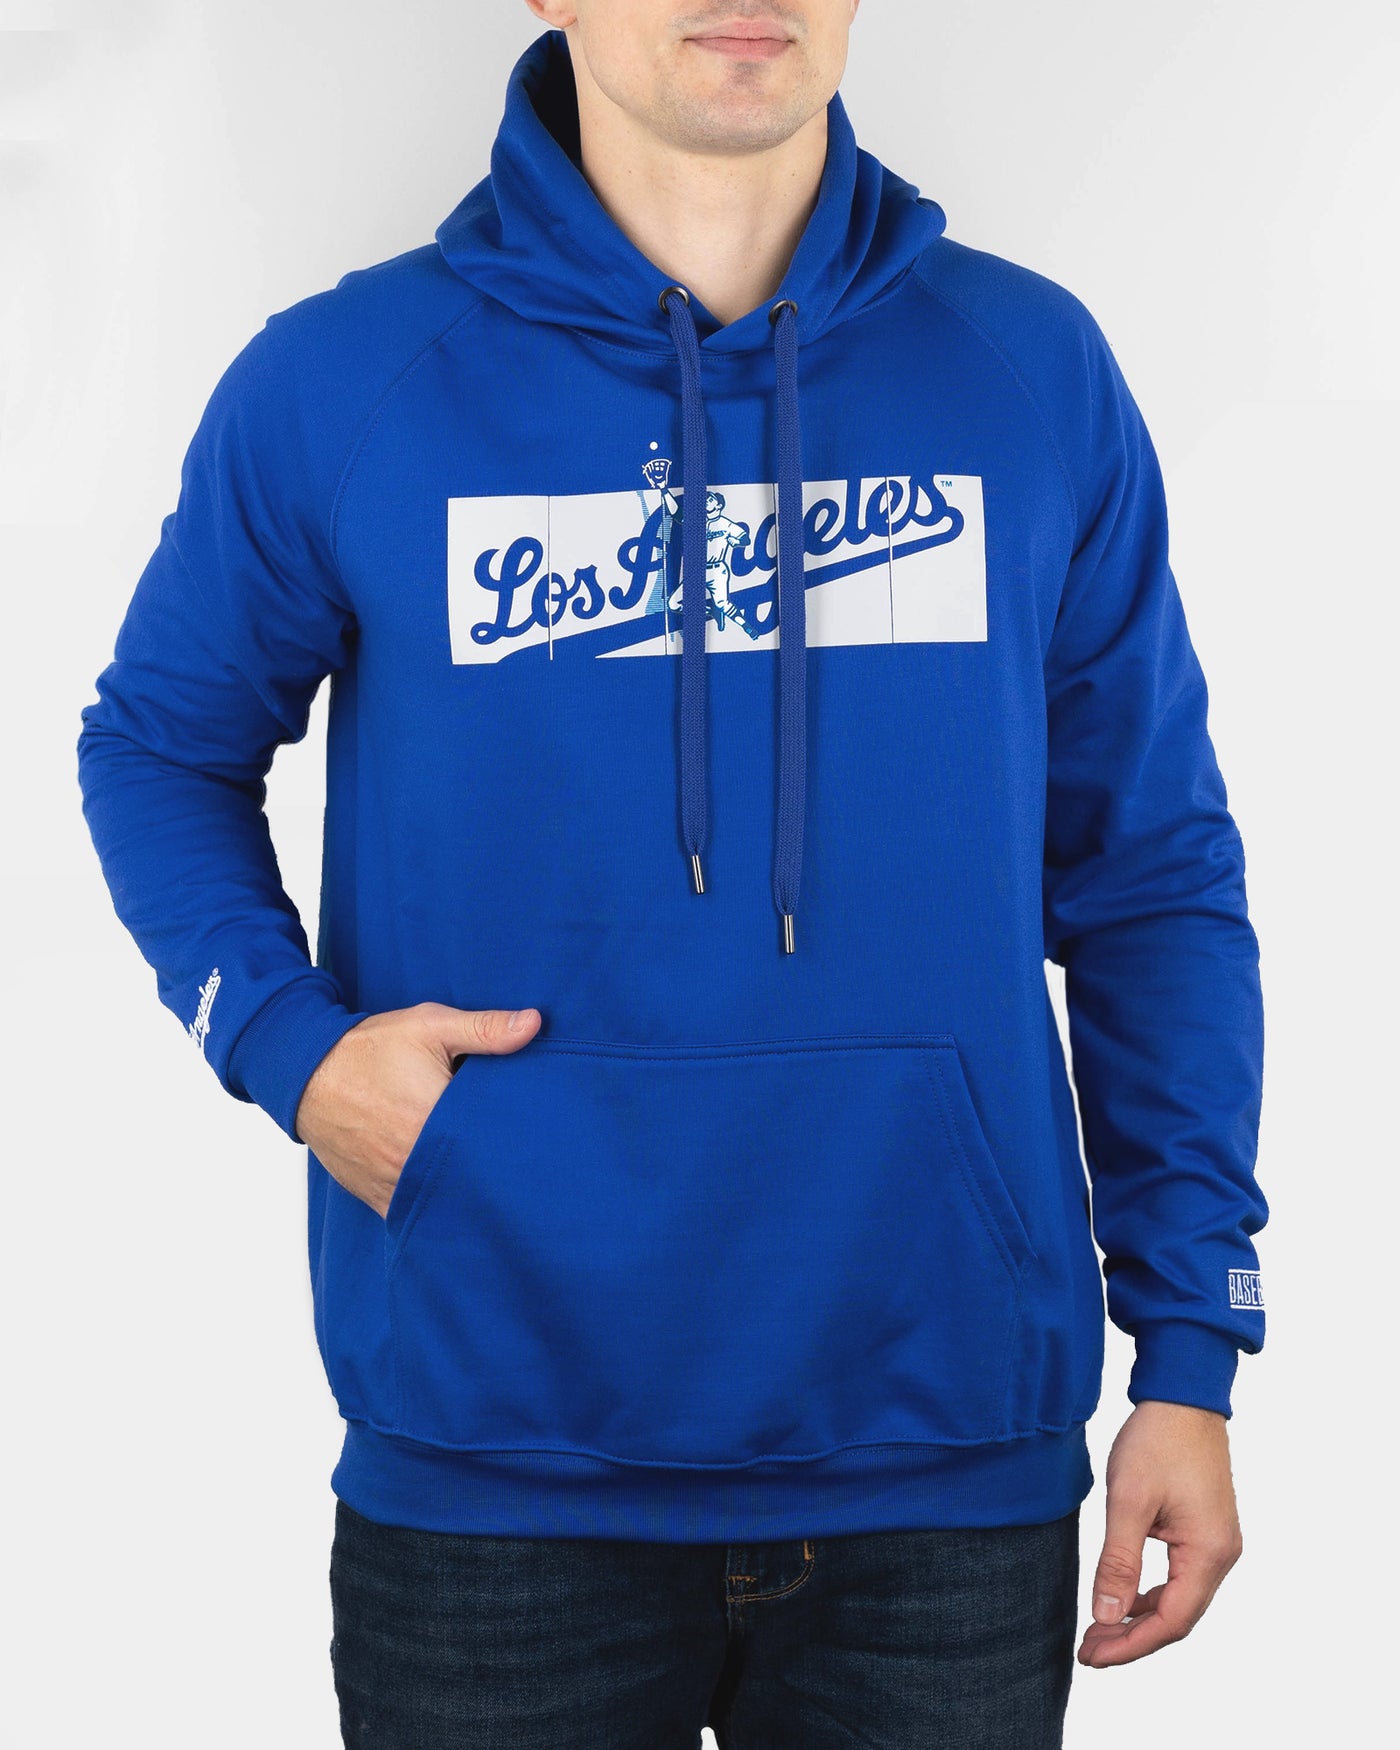 Outfield Fence Hoodie - Los Angeles Dodgers